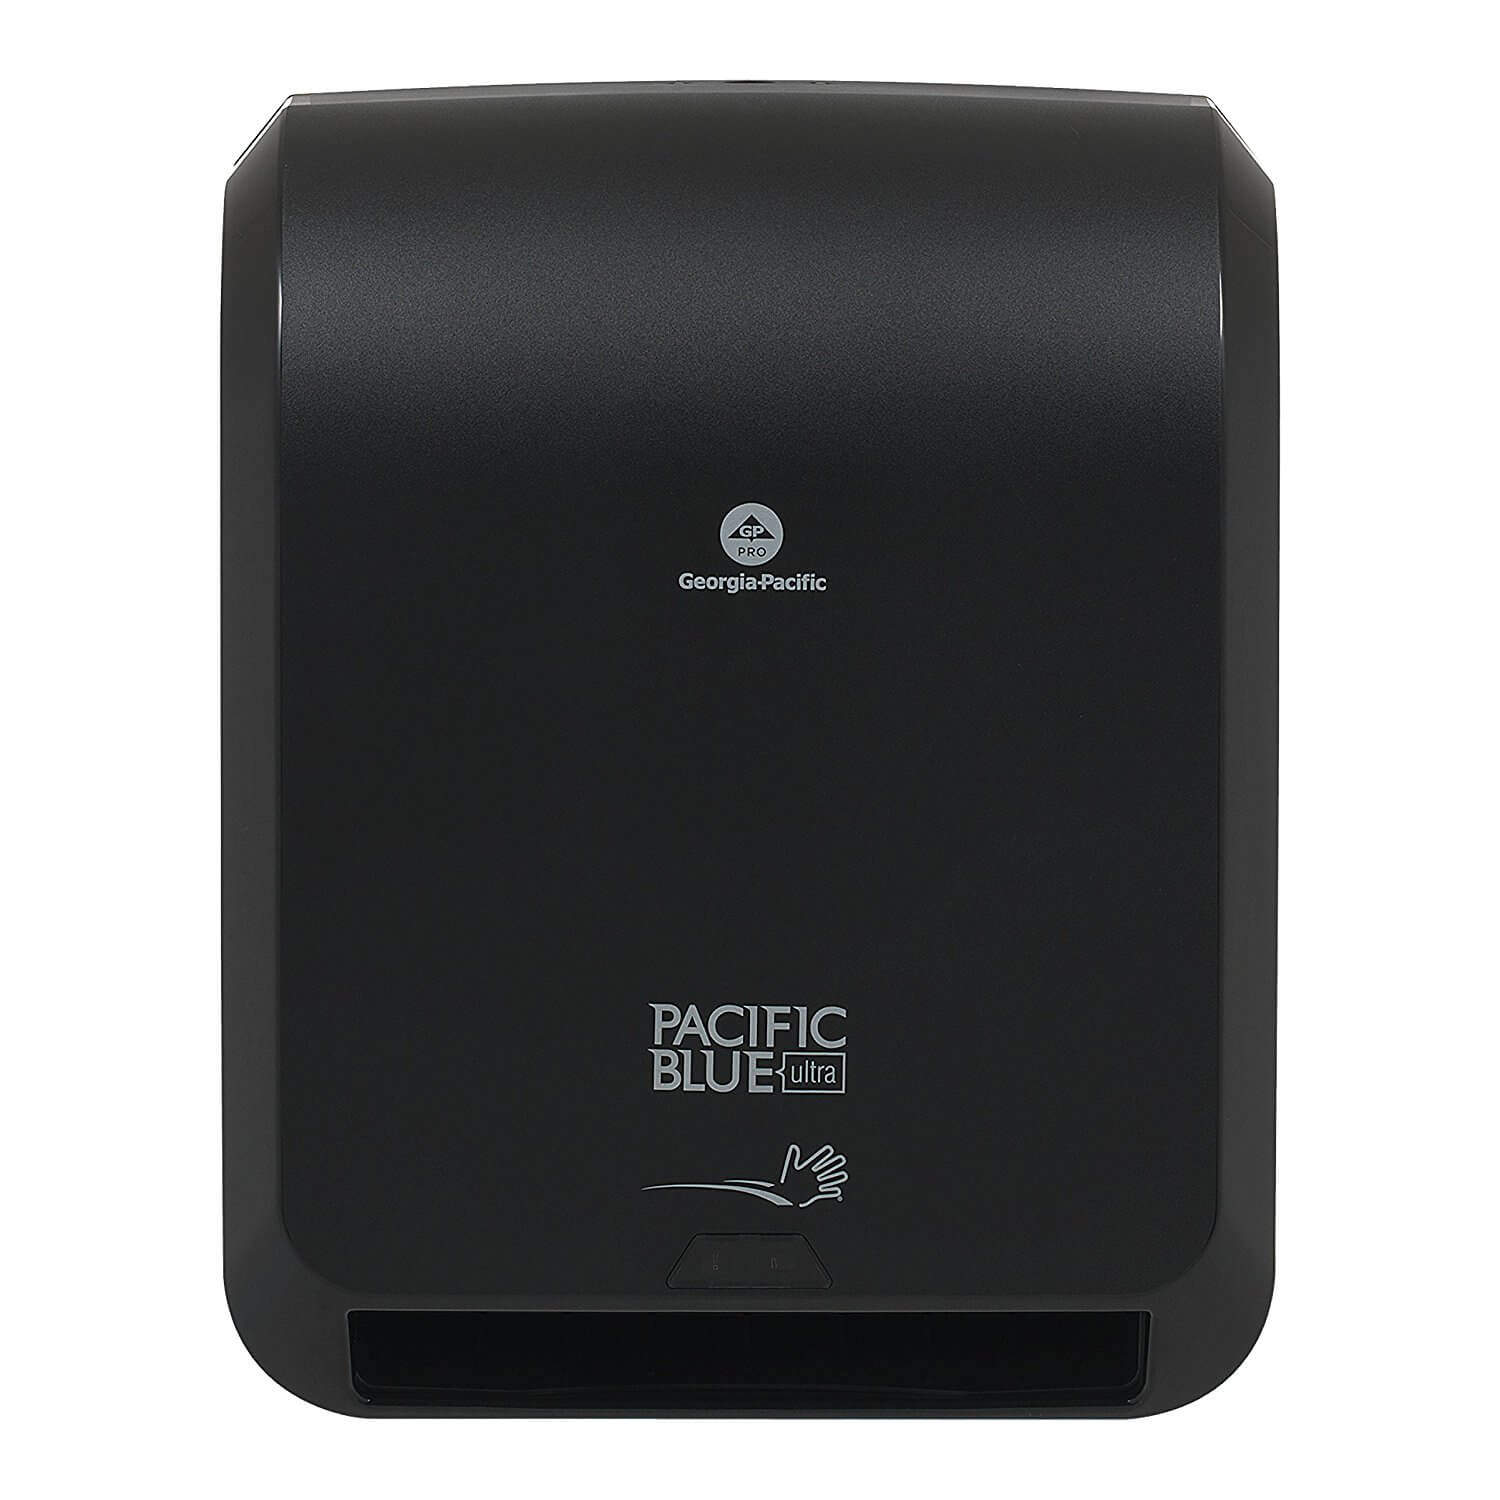 Pacific Blue Ultra Automated Paper Towel Dispenser by Georgia-Pacific